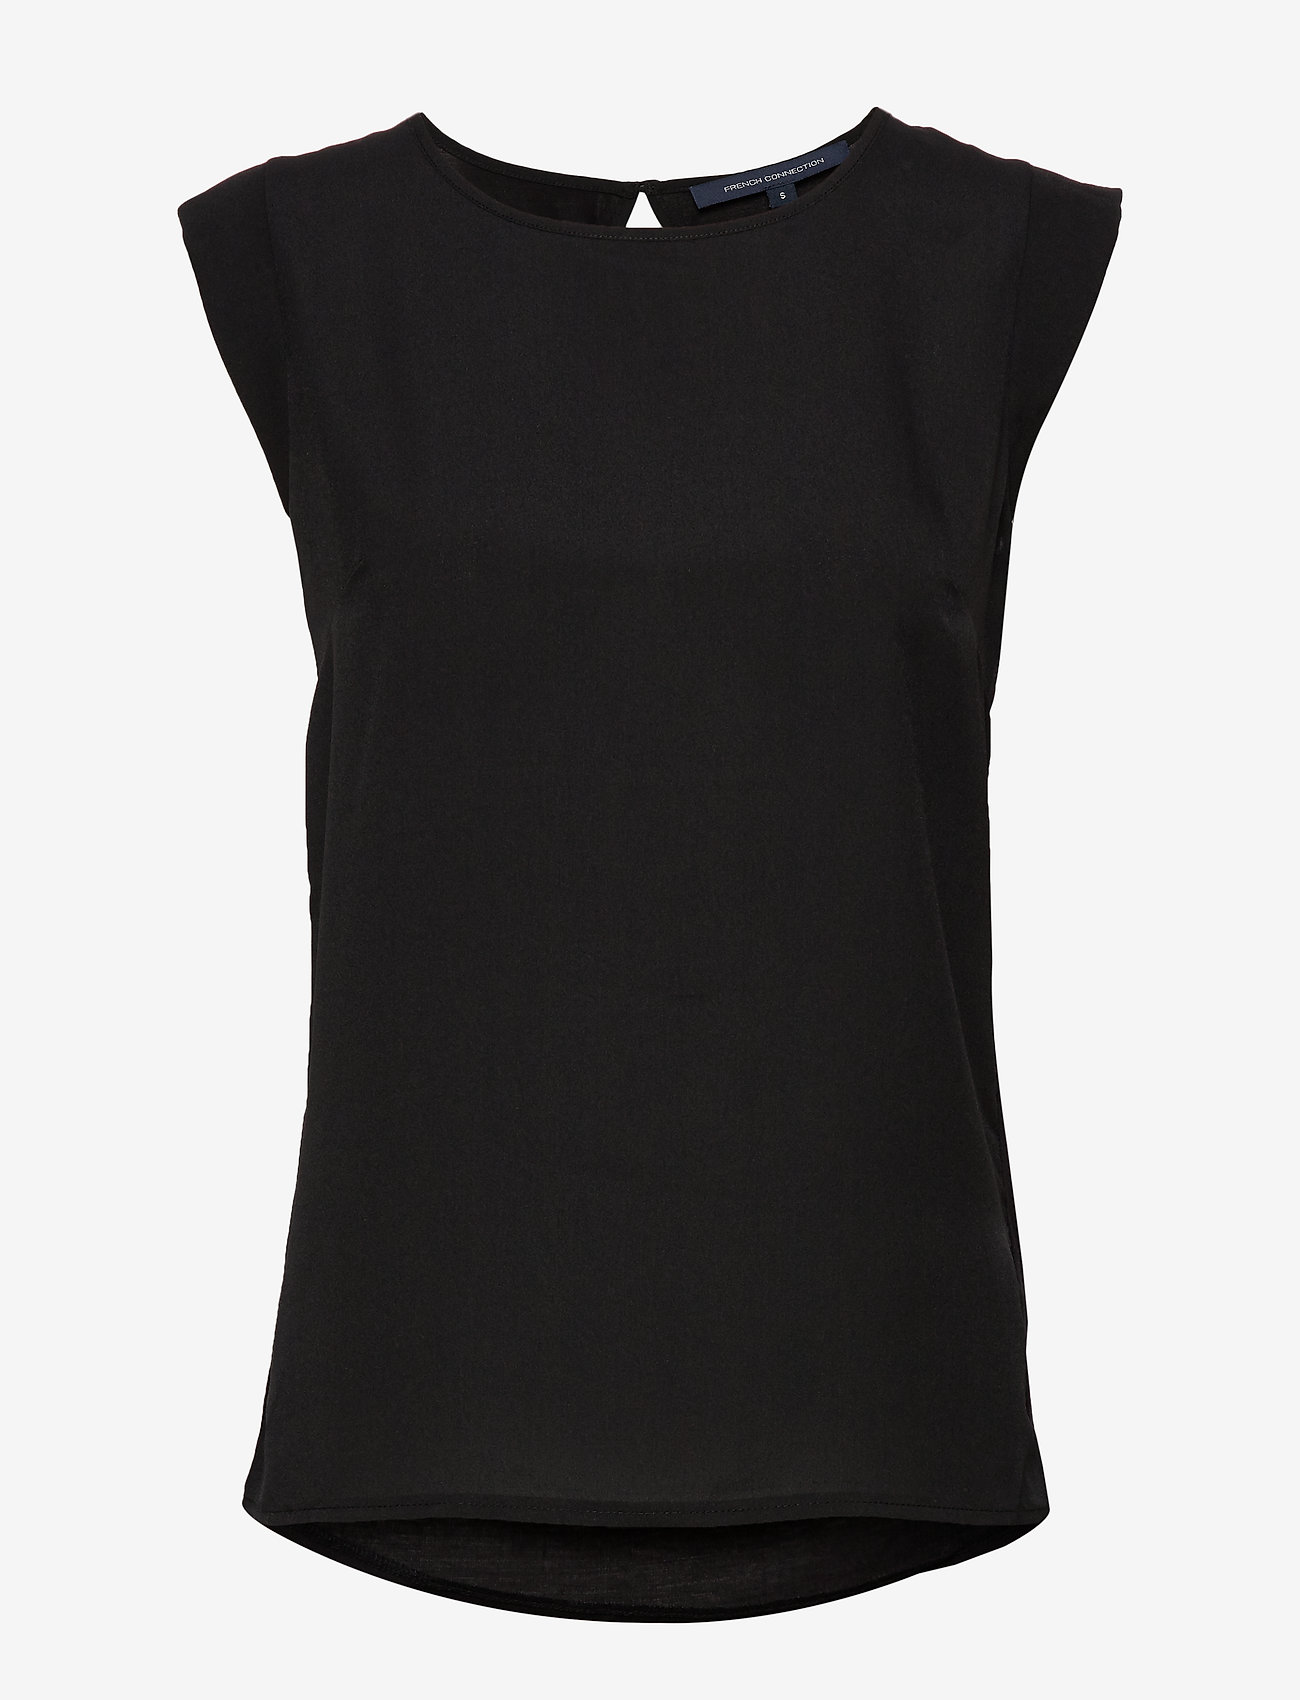 French Connection - POLLY PLAINS CAPPEDTEE - Ärmellose tops - black - 0